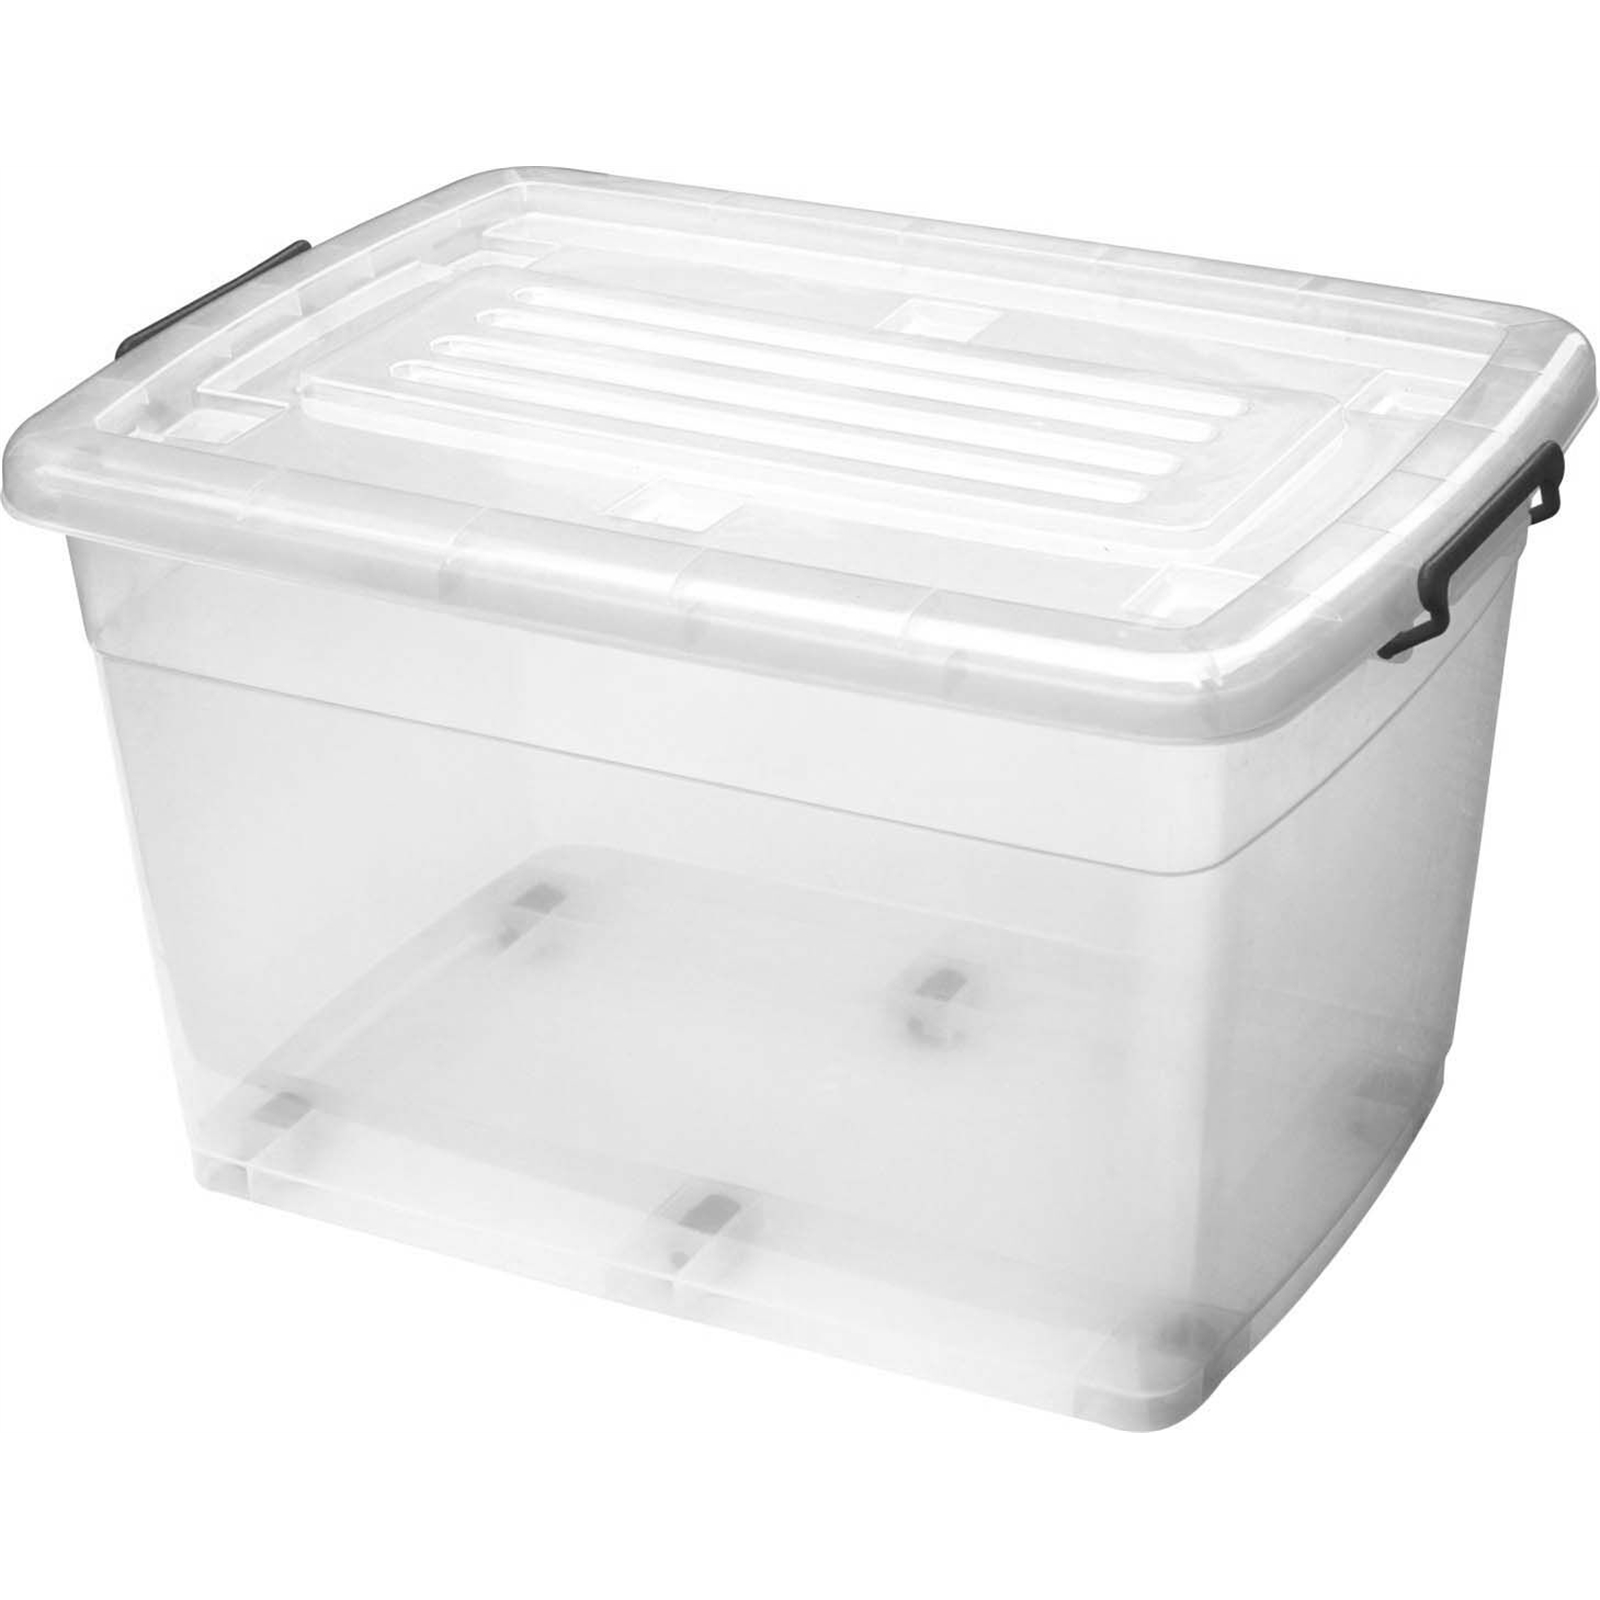 All Set 149L Storage Container with Lid